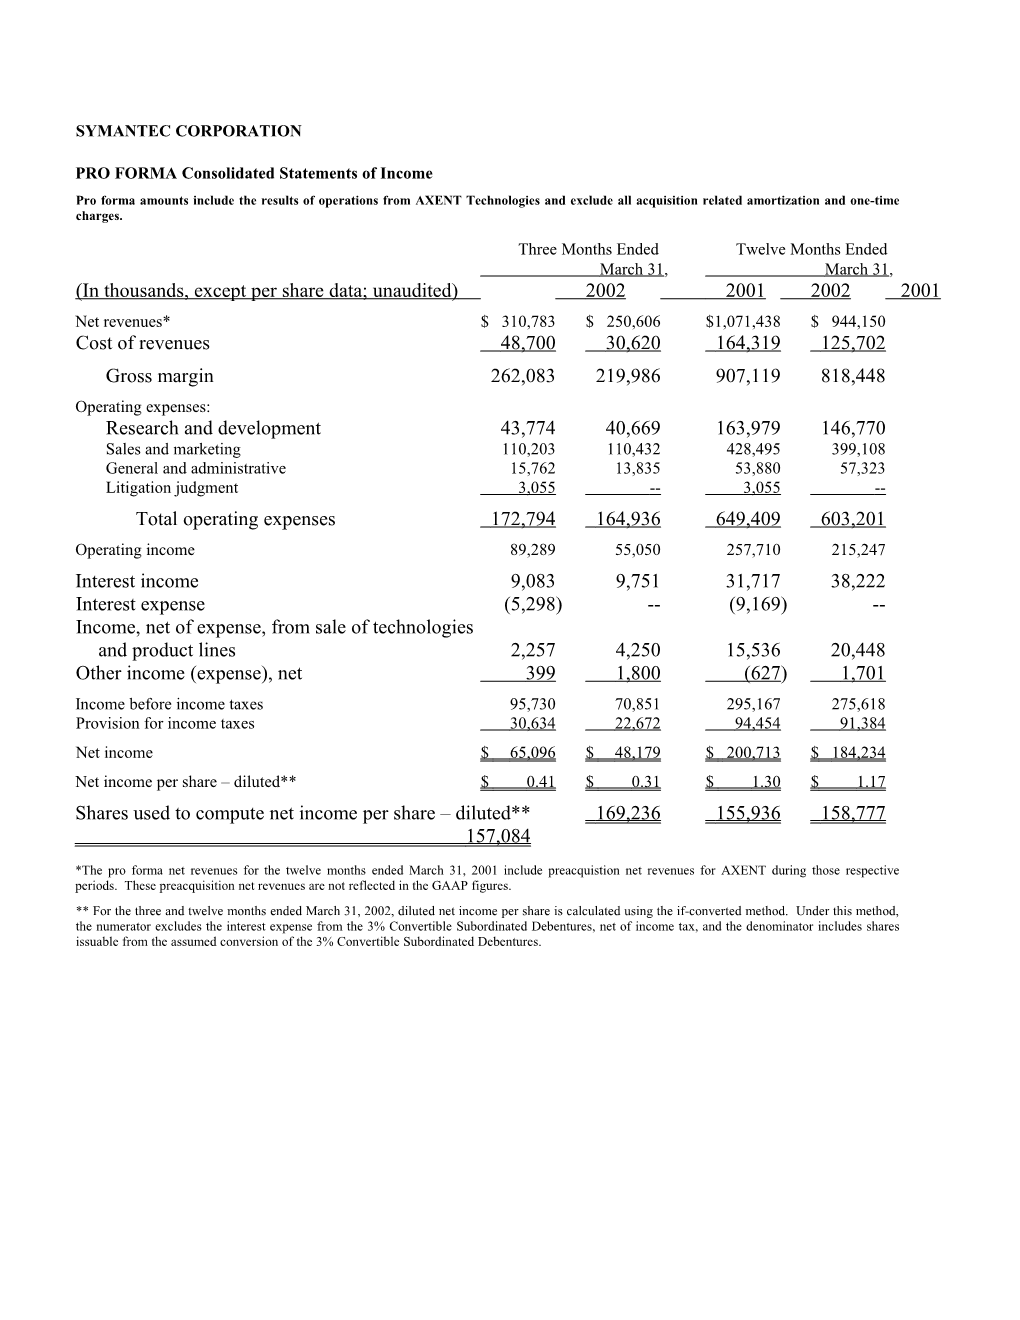 PRO FORMA Consolidated Statements of Income